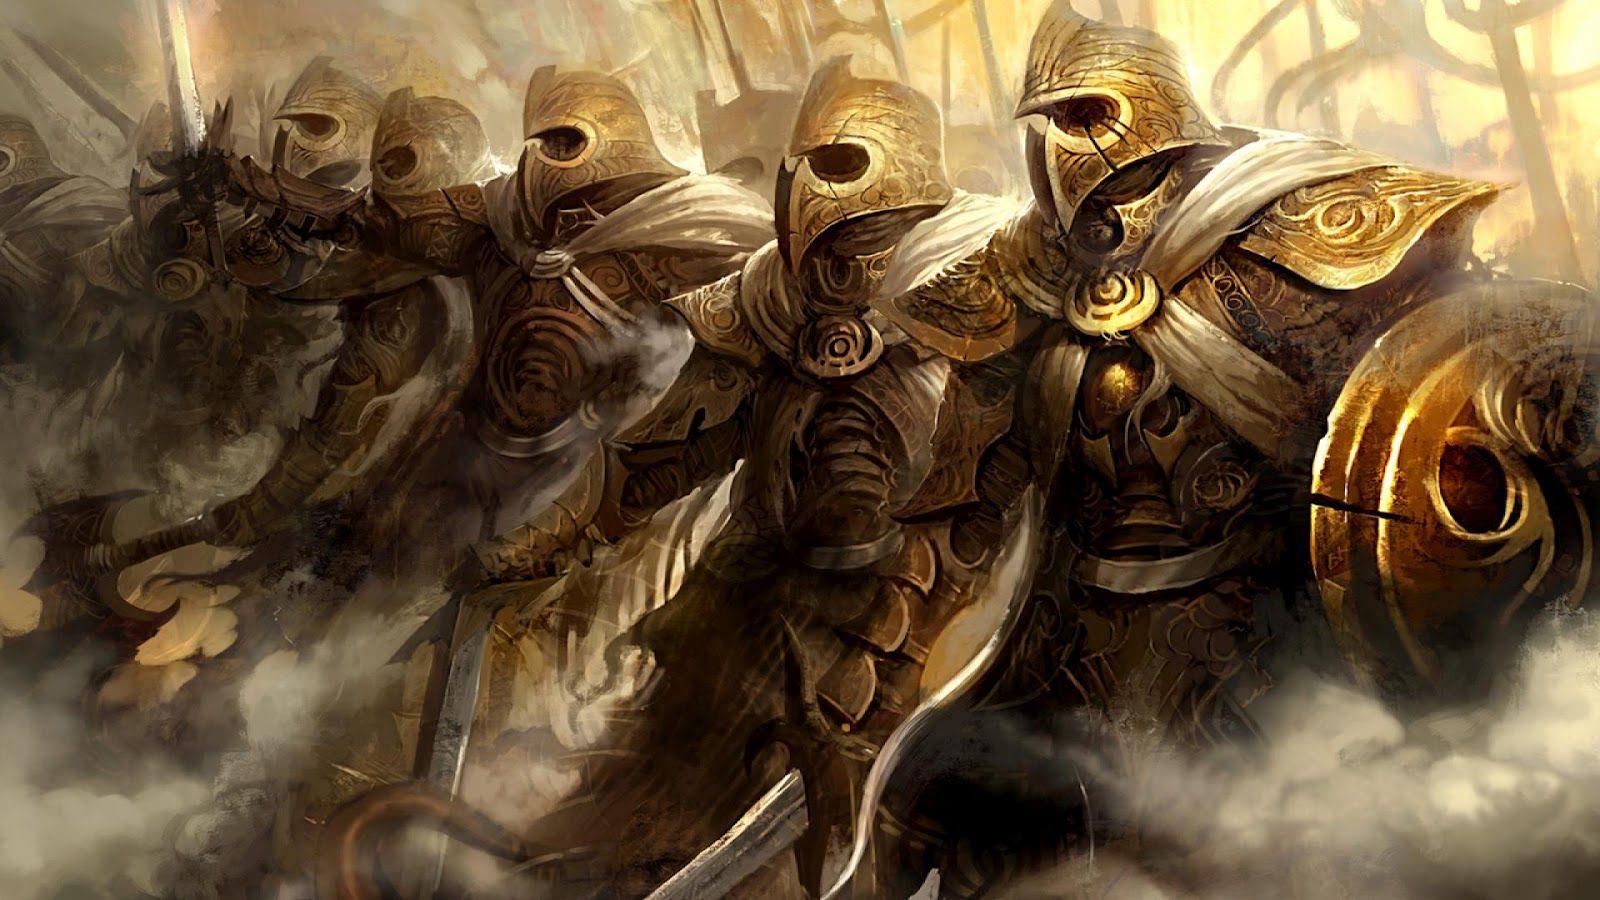 Free Medieval Battle Wallpaper High Quality at Cool Monodomo